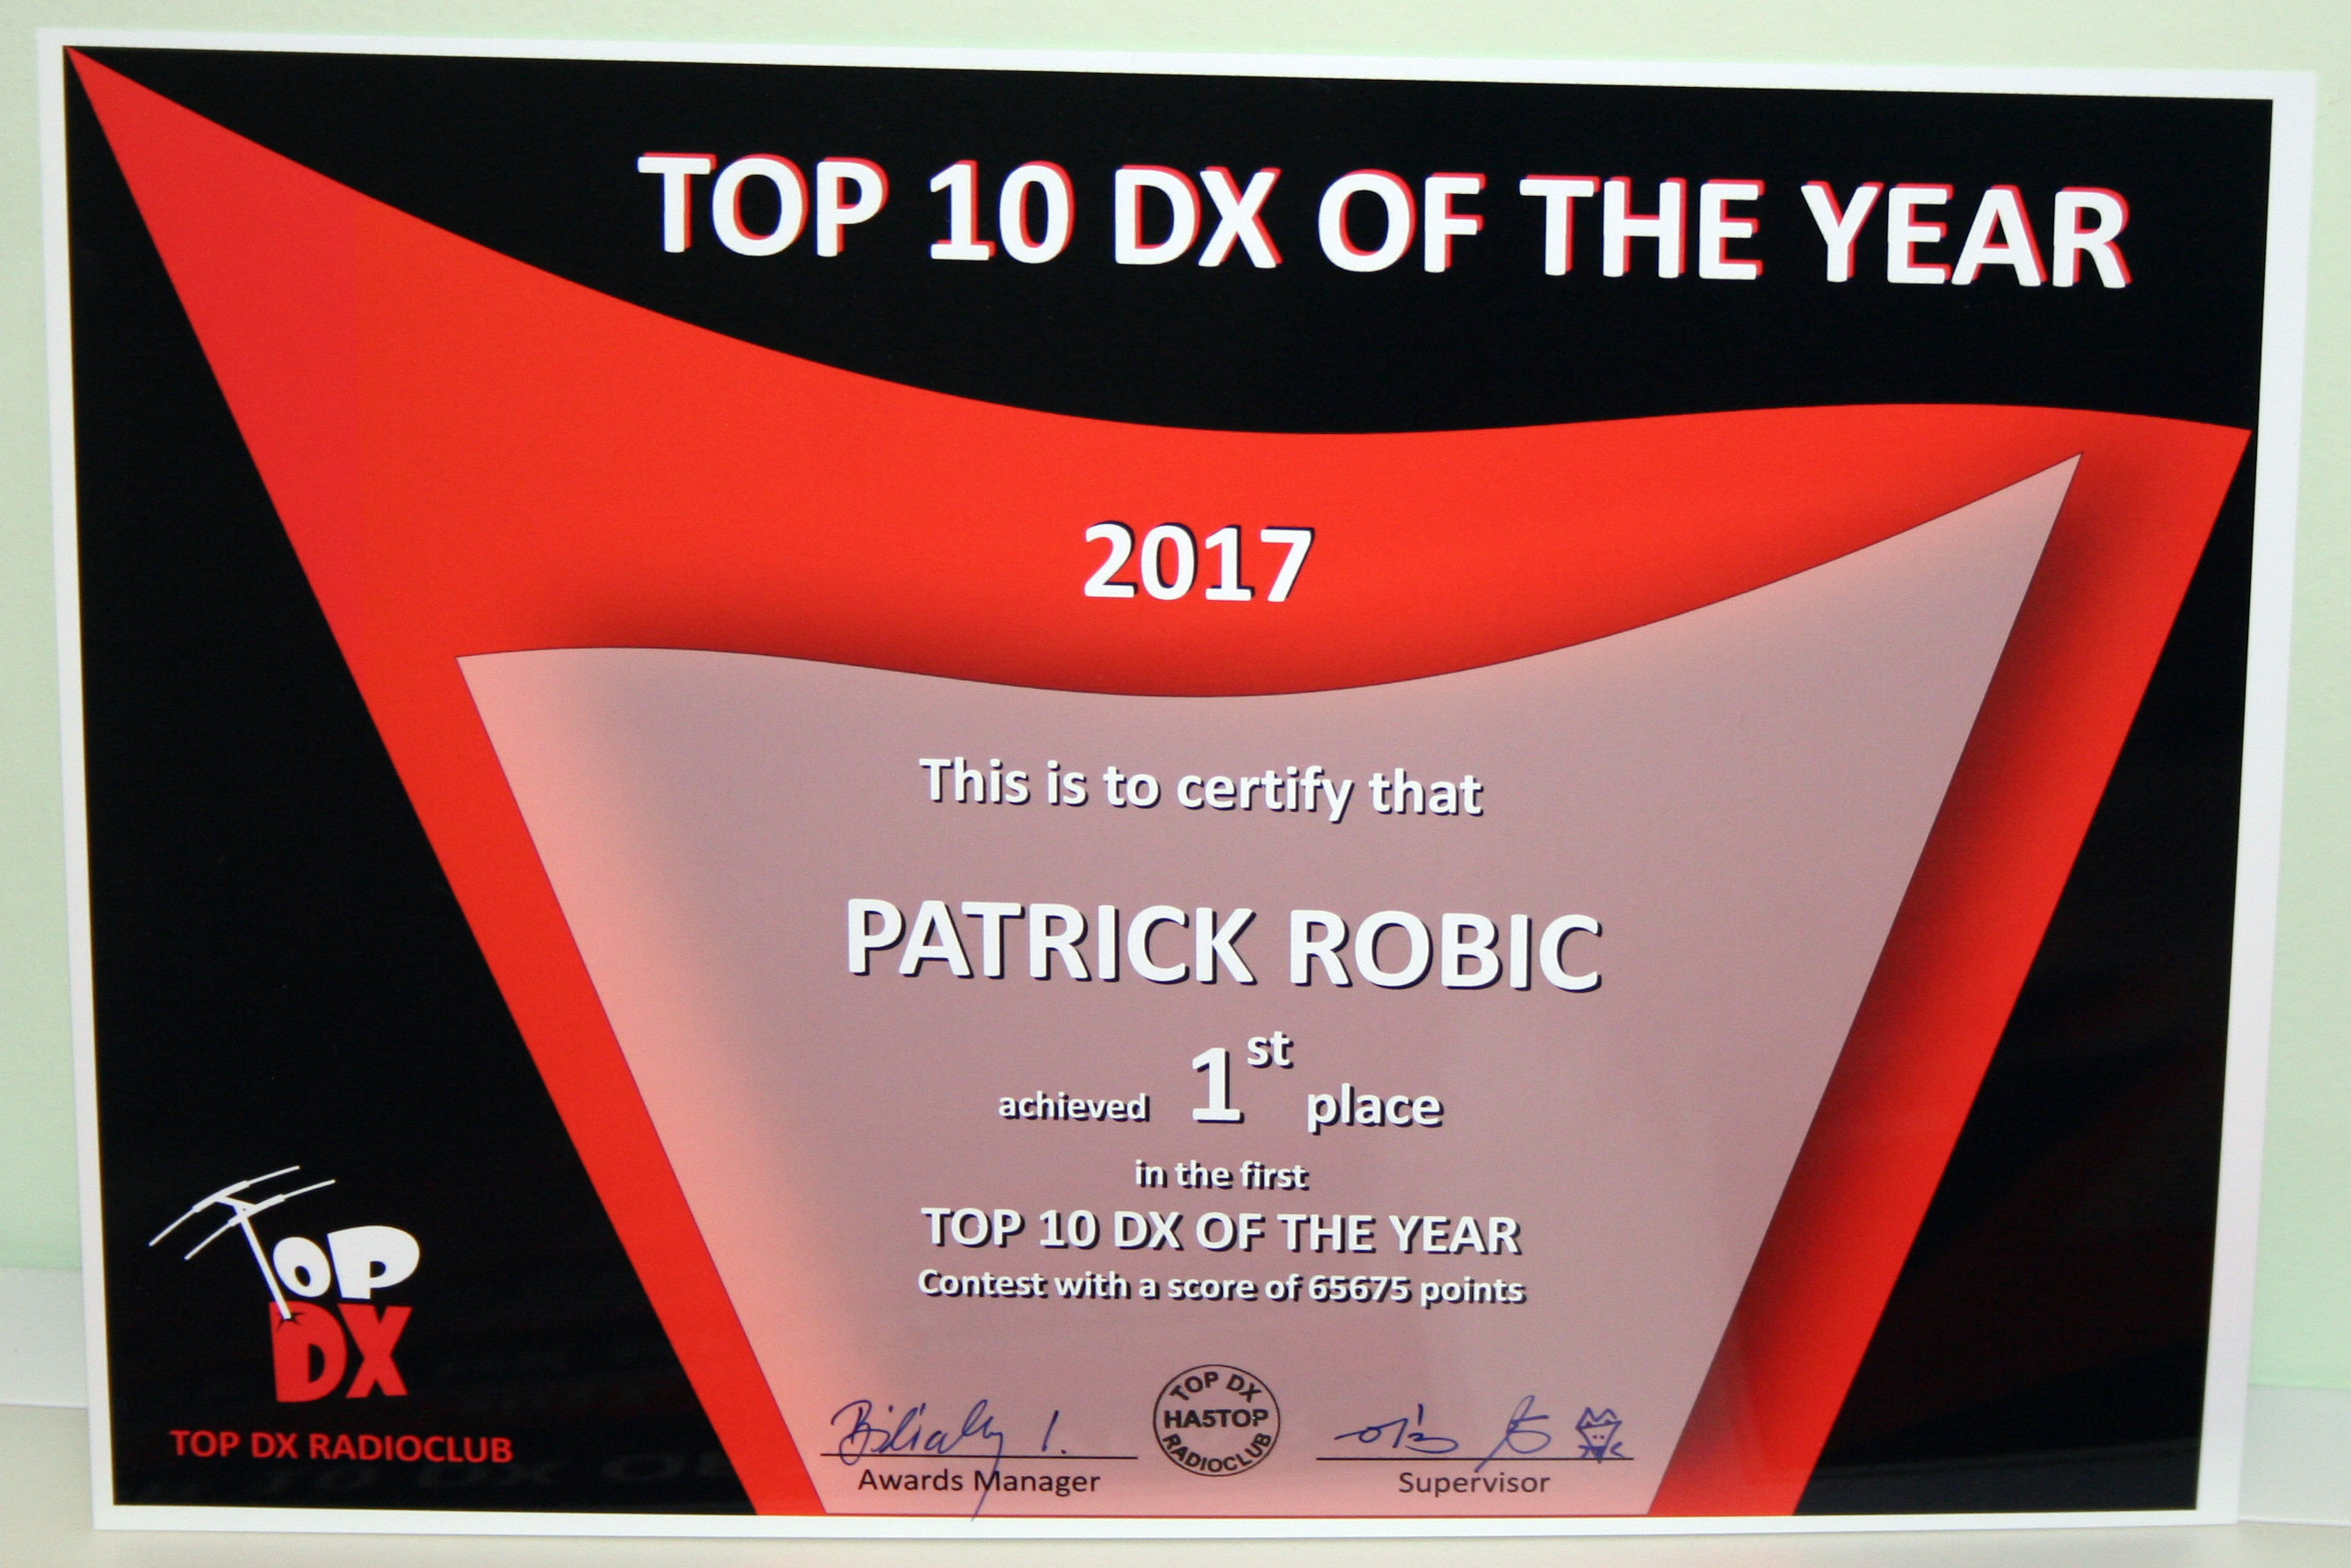 TOP 10 DX OF THE YEAR 2017